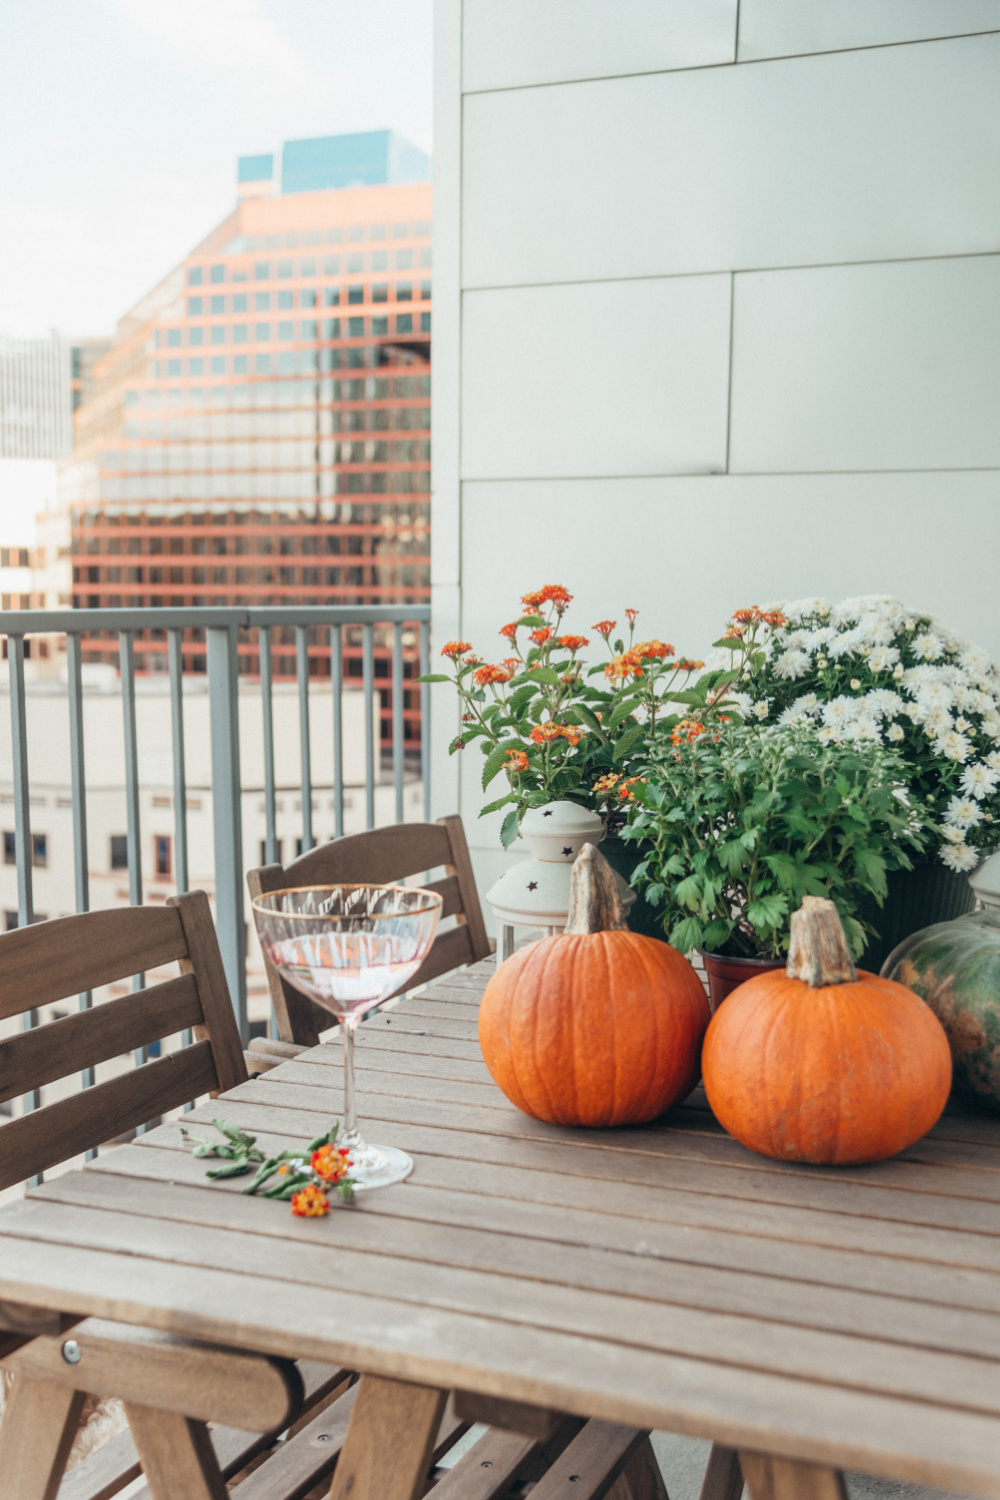 how to decorate your patio for fall, fall patio decor, fall patio decorating ideas, fall patio decor apartment